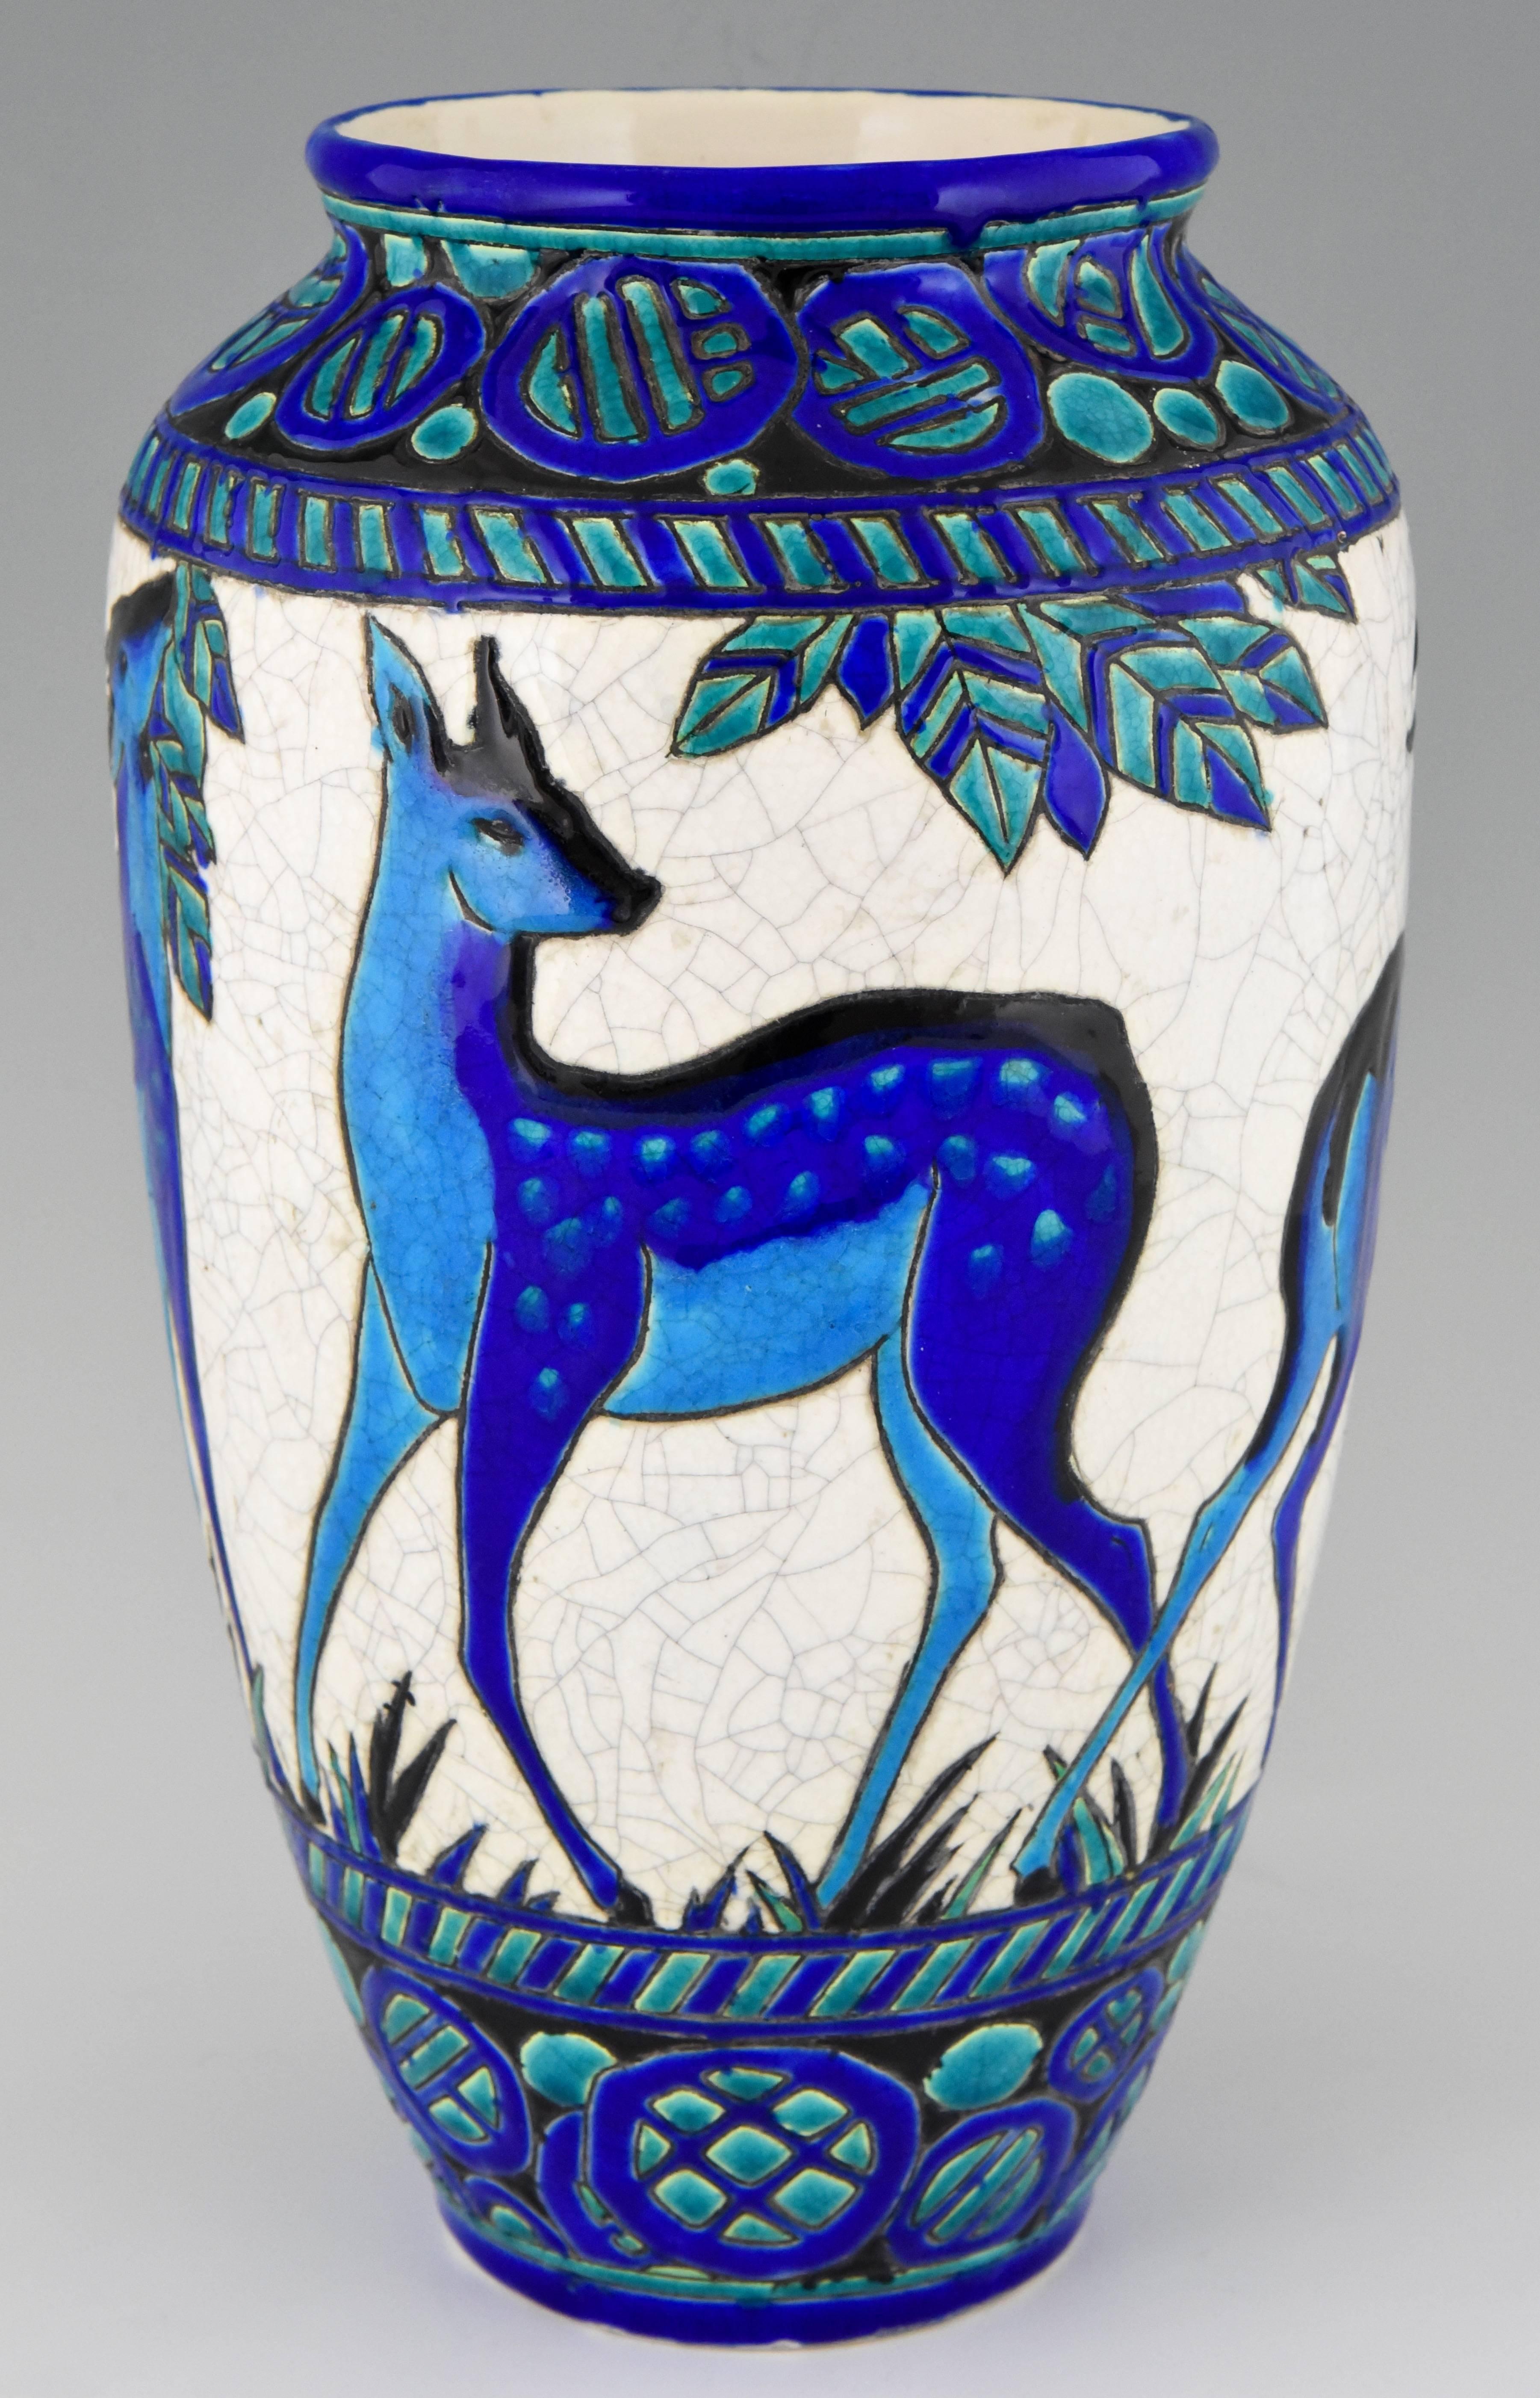 Art Deco ceramic vase with deer designed by Charles Catteau for the line “Biches Bleues” for Boch Freres, La Louviere, Belgium.

Artist/ Maker: Charles Catteau for Boch Freres.
Signature/ Marks: Boch Freres seal. D 943 decor created between